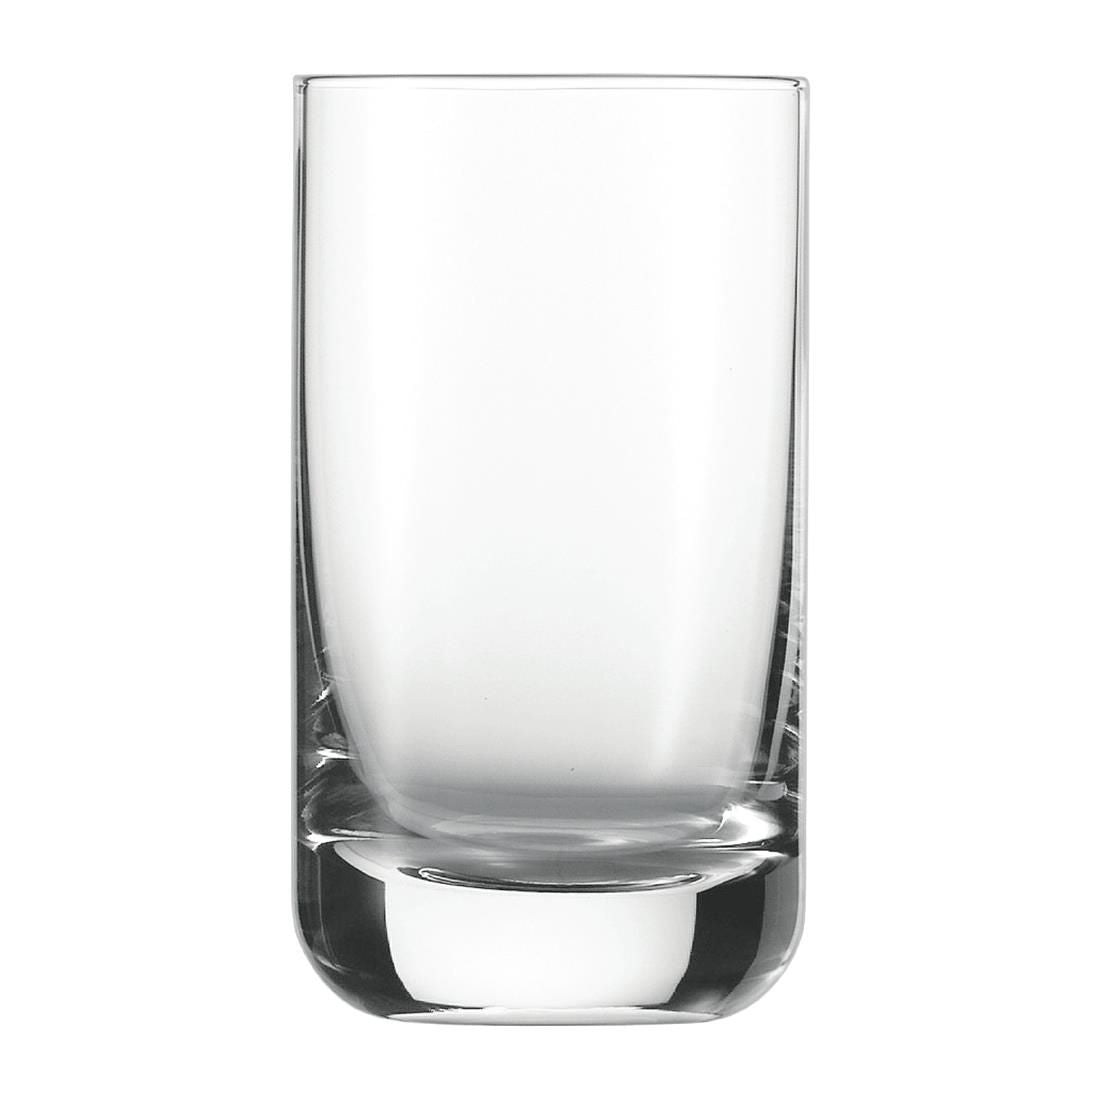 DC838 Schott Zwiesel Convention Water Tumbler 255ml (Pack of 6) JD Catering Equipment Solutions Ltd